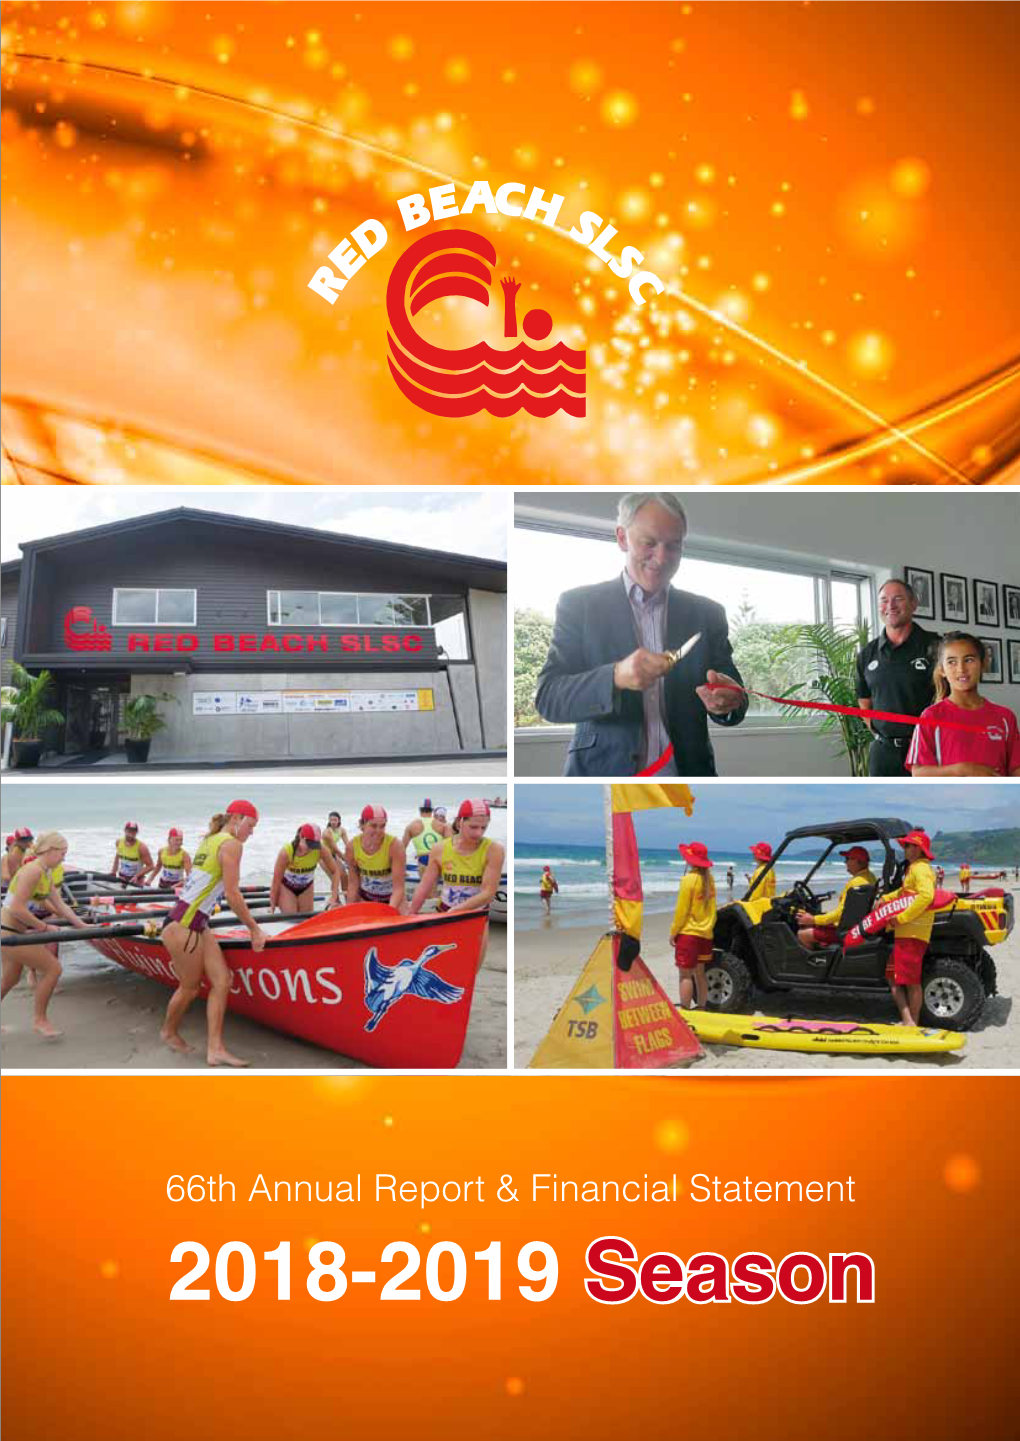 66Th Annual Report & Financial Statement